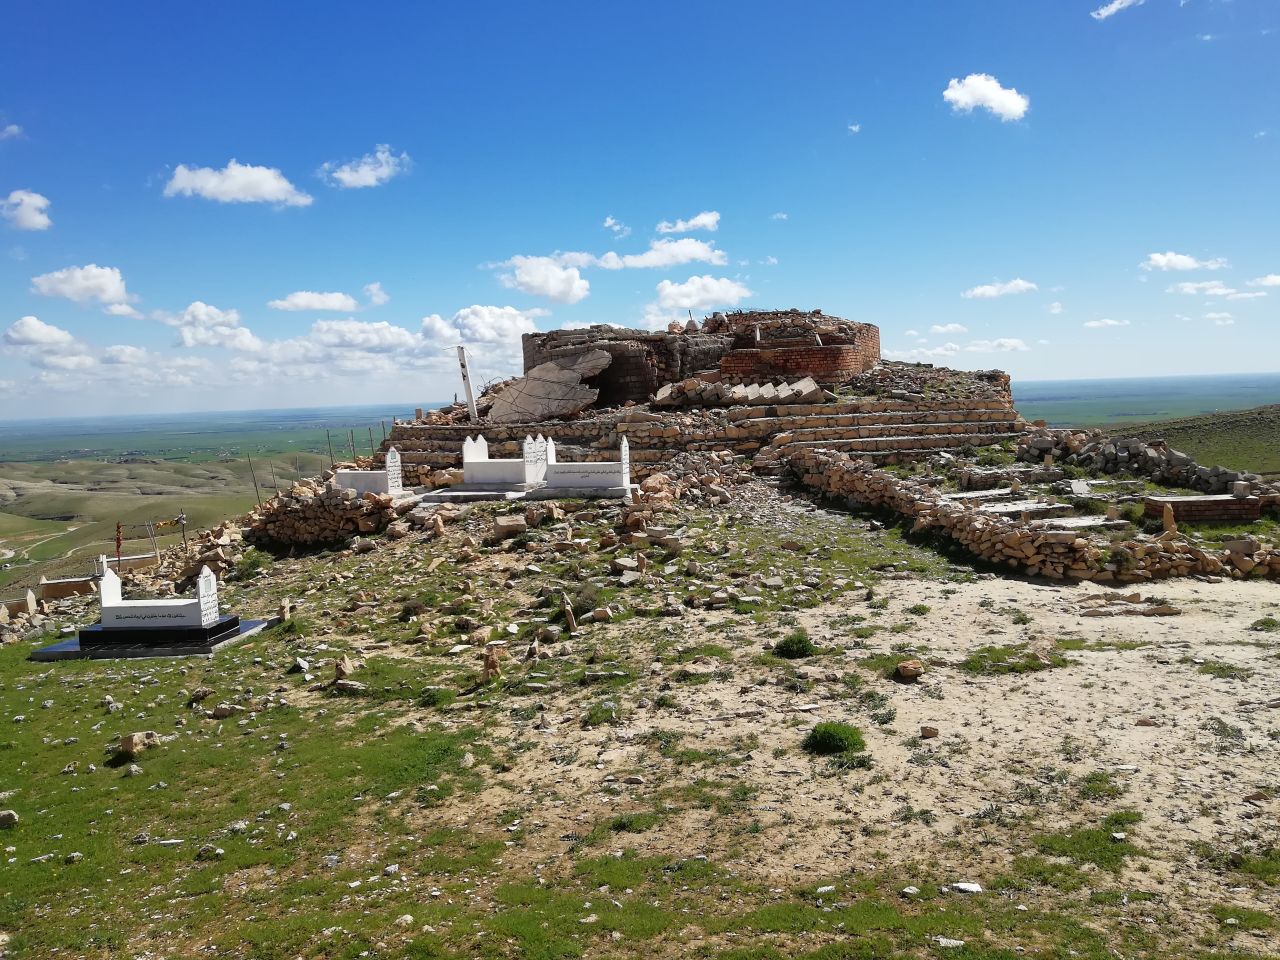 <strong>Mam Rashan Shrine, Mount Sinjar, Iraq. </strong>This Yazidi shrine was destroyed in a genocidal campaign. Rebuilding it could help this embattled minority community that has long been denied its rights. 